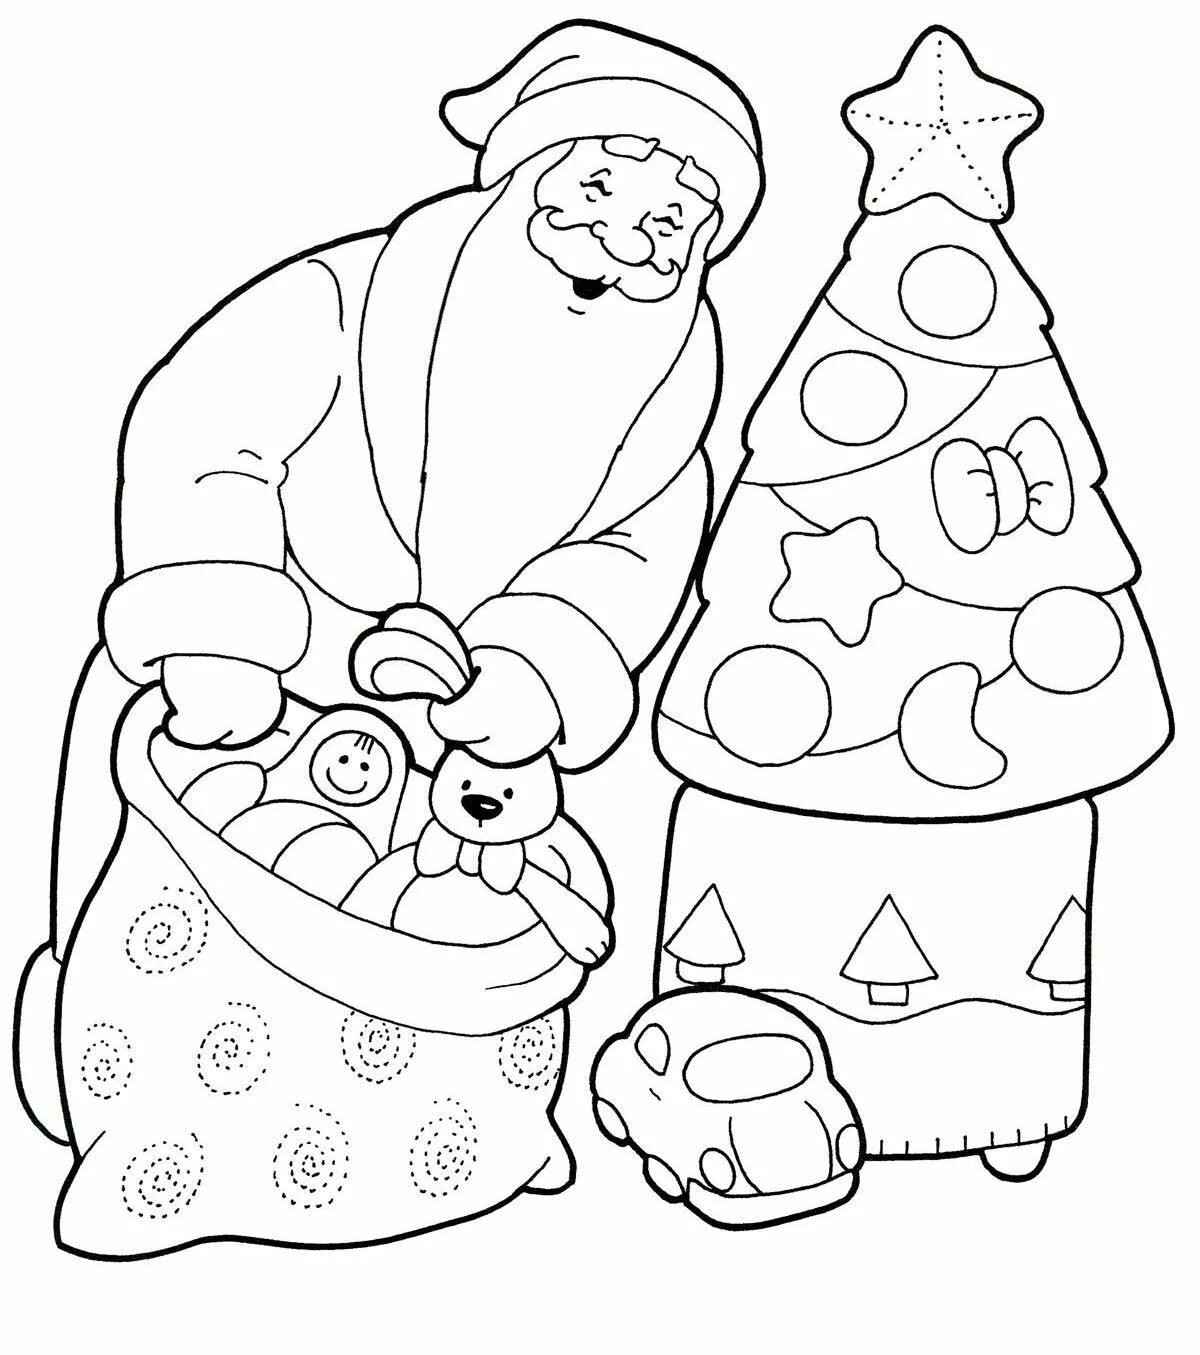 Santa Claus and Christmas tree for kids #9